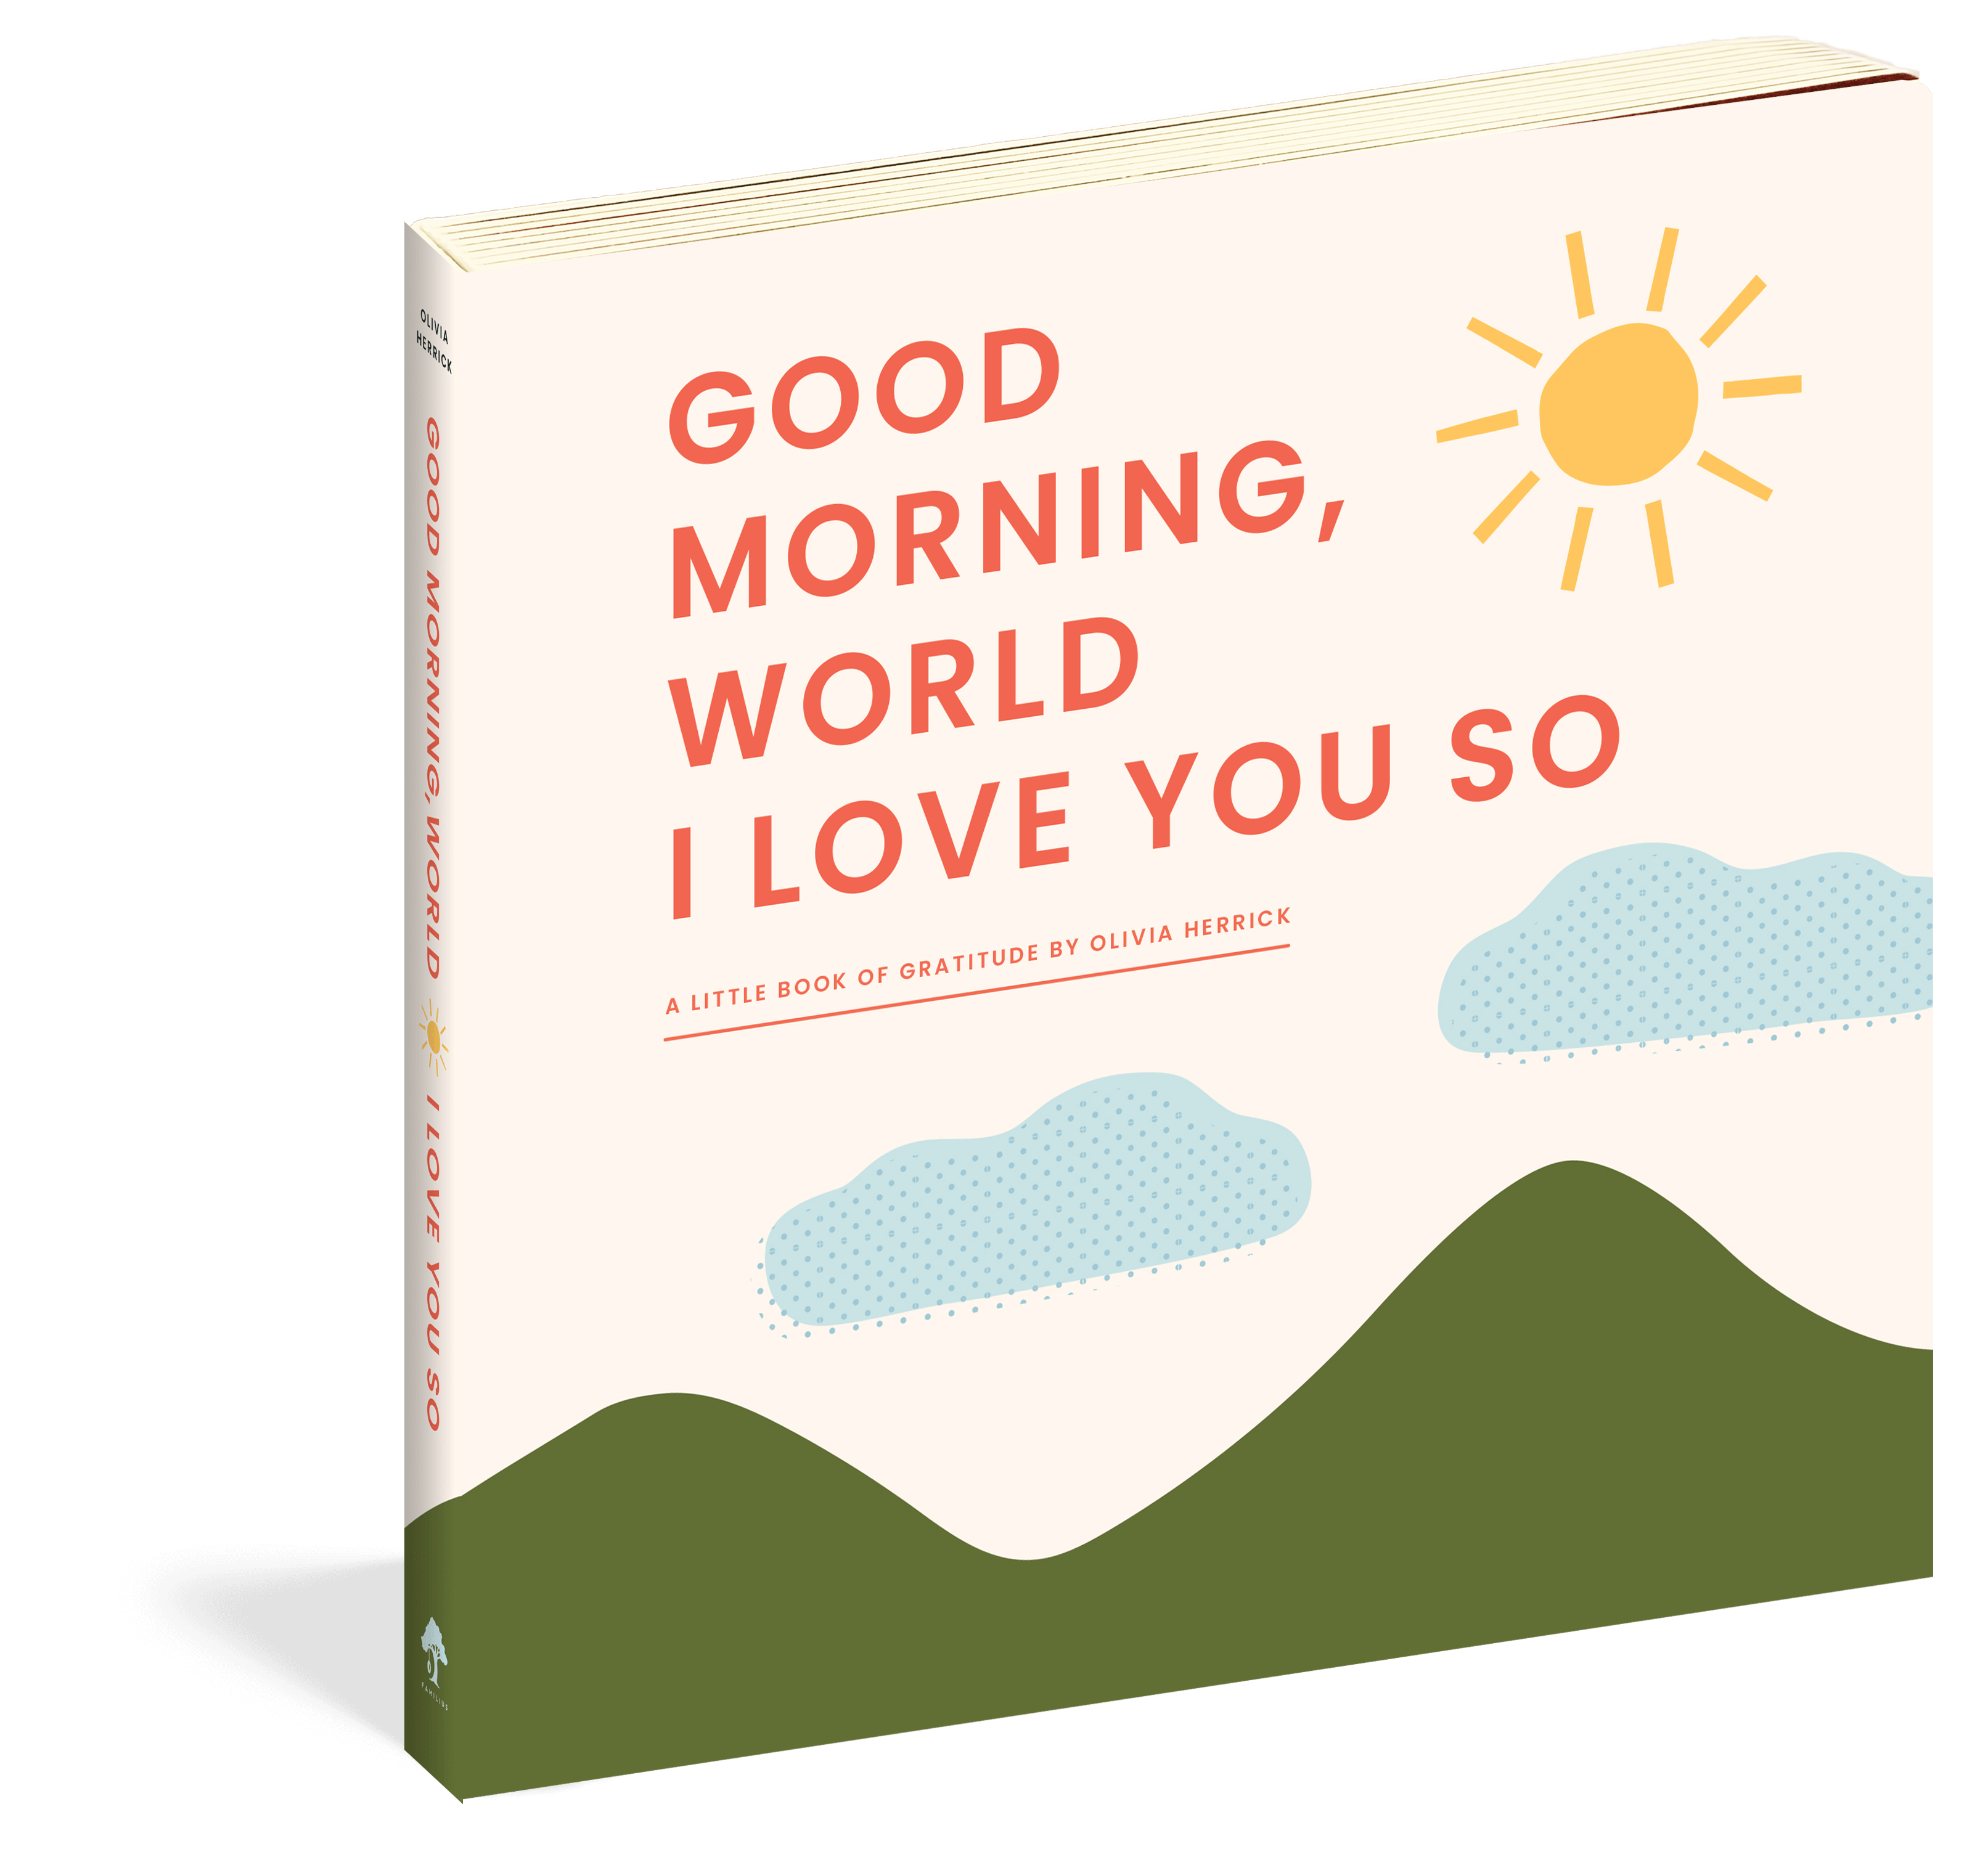 The cover of the board book Good Morning, World—I Love You So